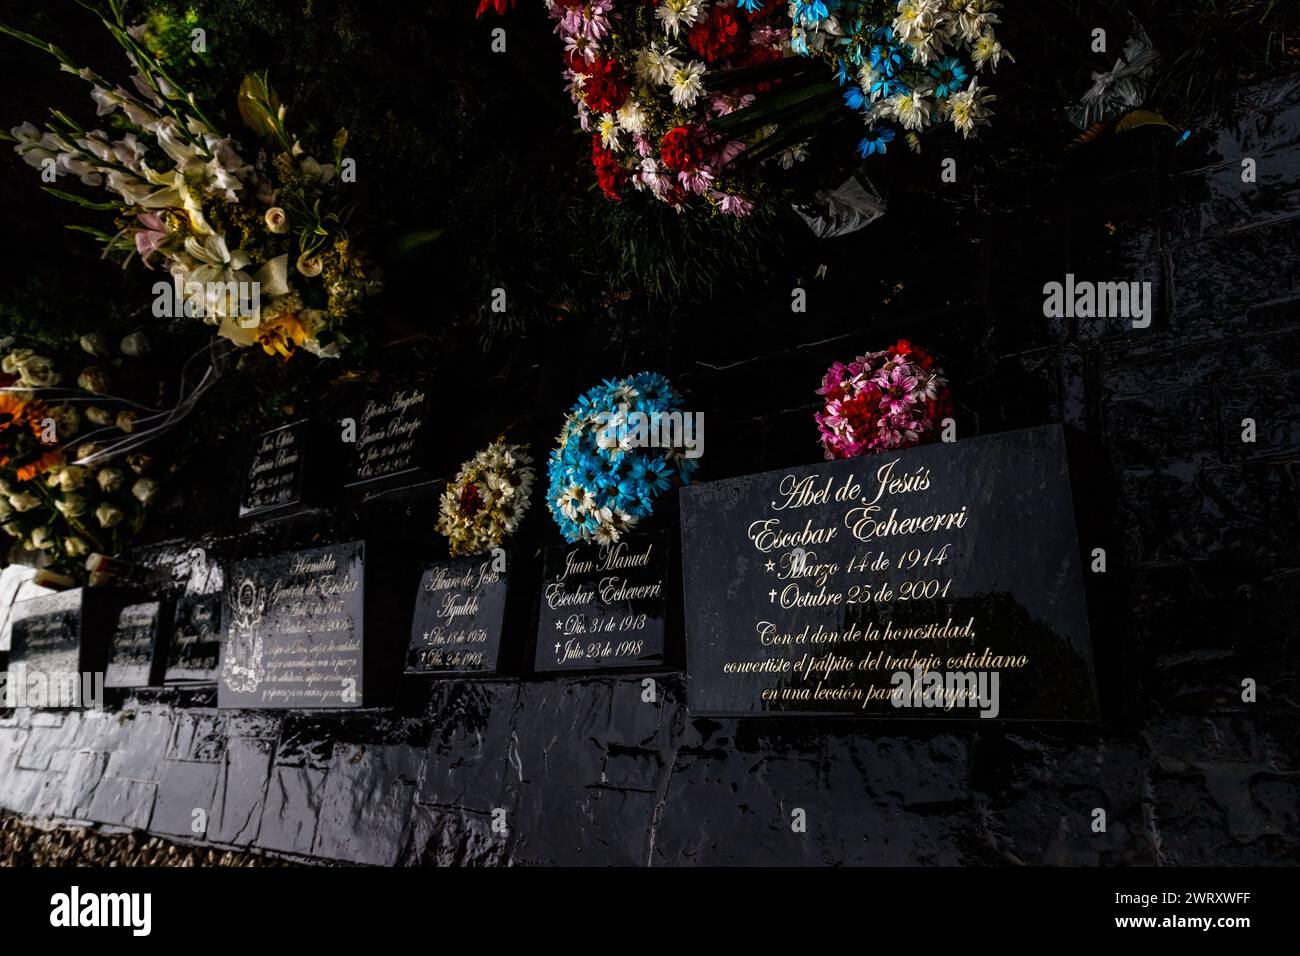 Medellin, Colombia - January 11, 2023: Graves of Pablo Escobar Gaviria's family with the tombstone of his father, Abel de Jesus, in the foreground Stock Photo